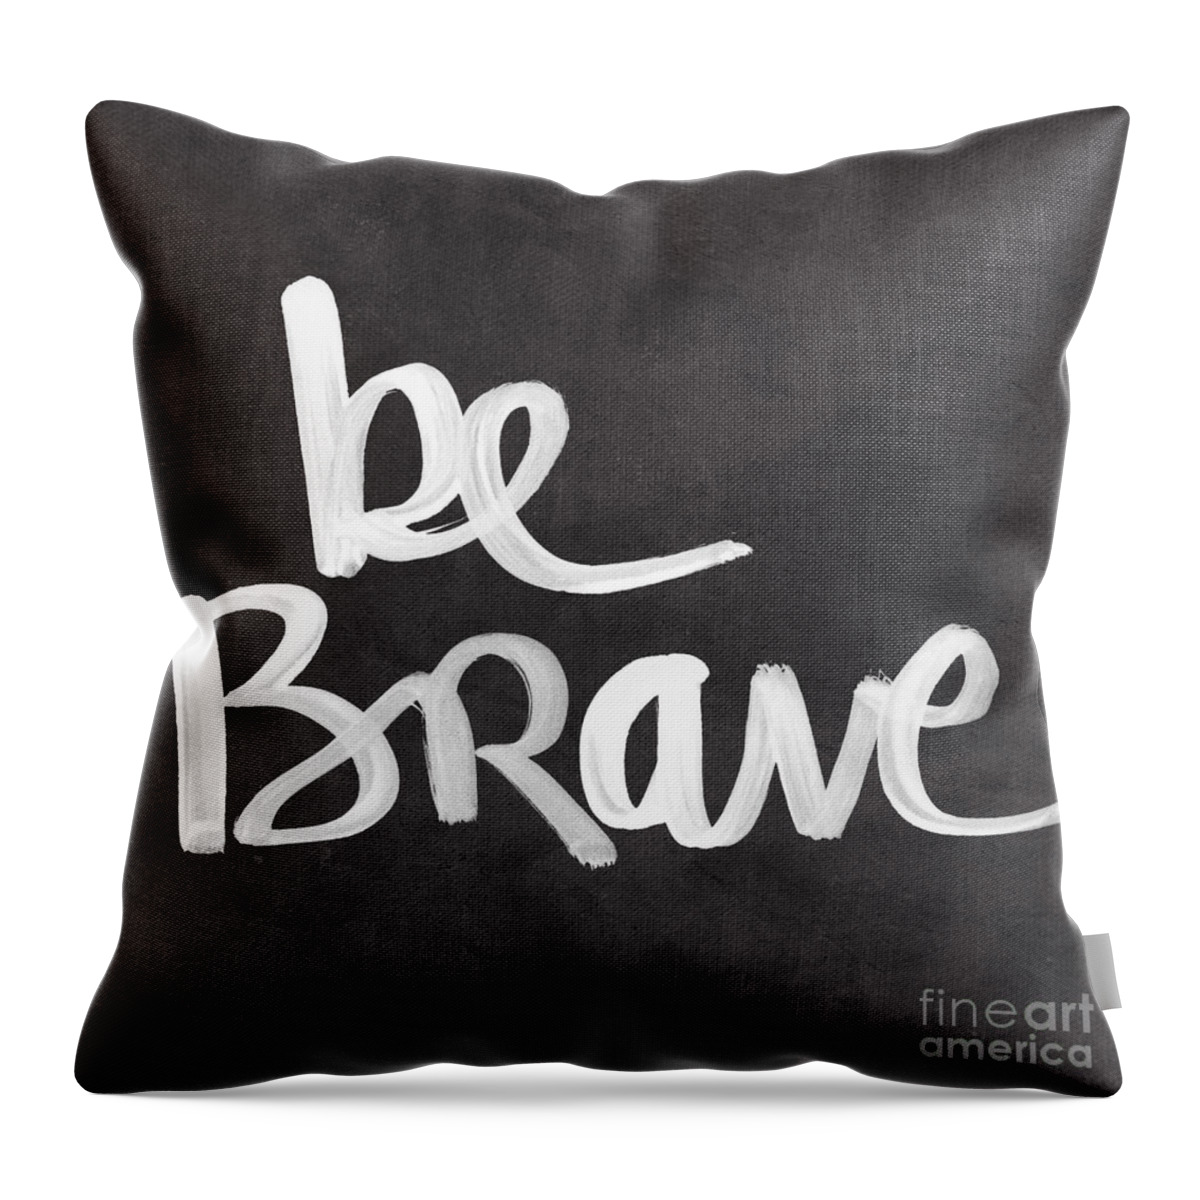 Brave Throw Pillow featuring the painting Be Brave by Linda Woods